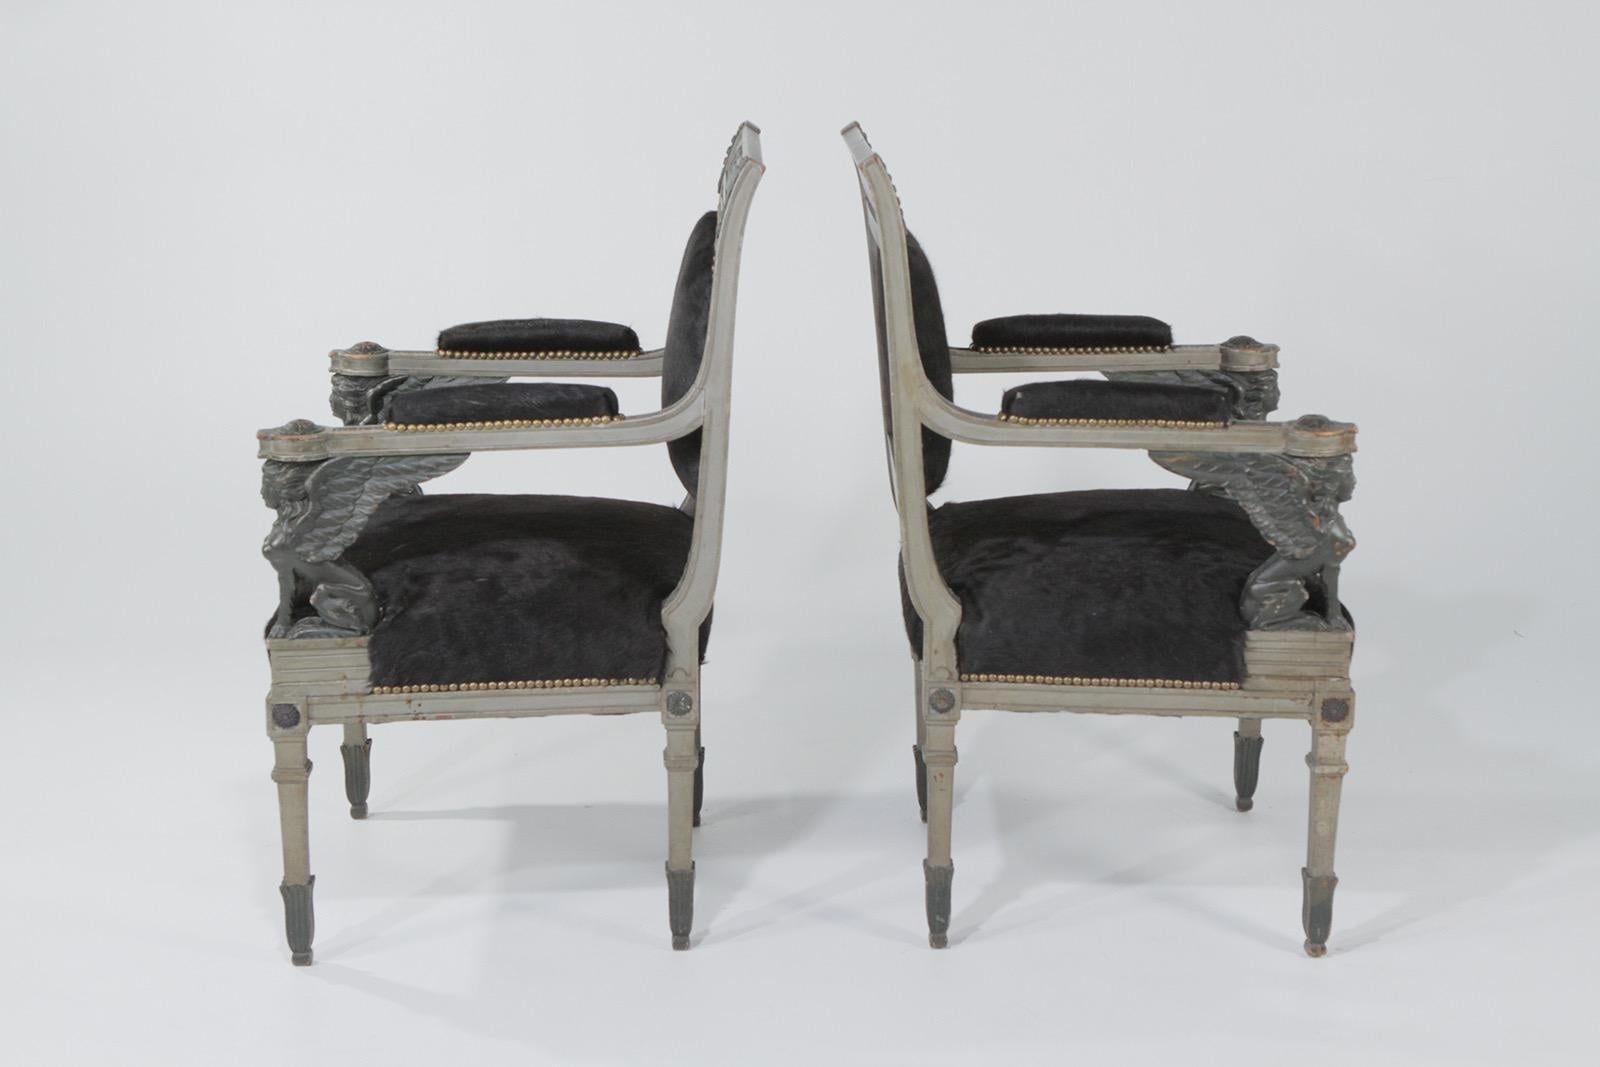 Superb Neoclassical Egyptian Revival Armchairs with Black Cowhide Upholstery 11